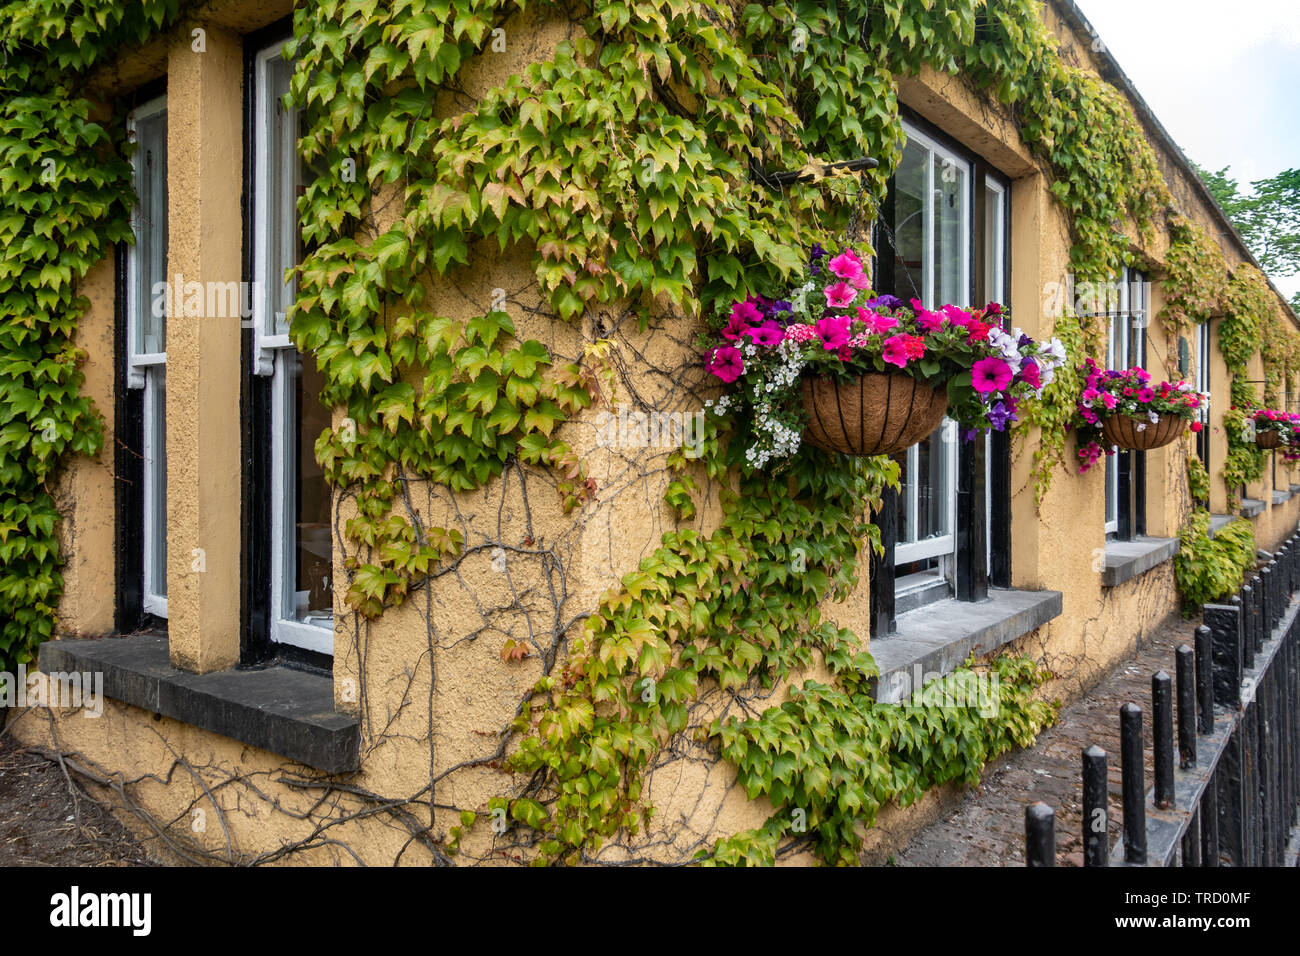 Dunraven Arms Hotel in Adare, Ireland - Considered One of Ireland's Prettiest Towns Stock Photo